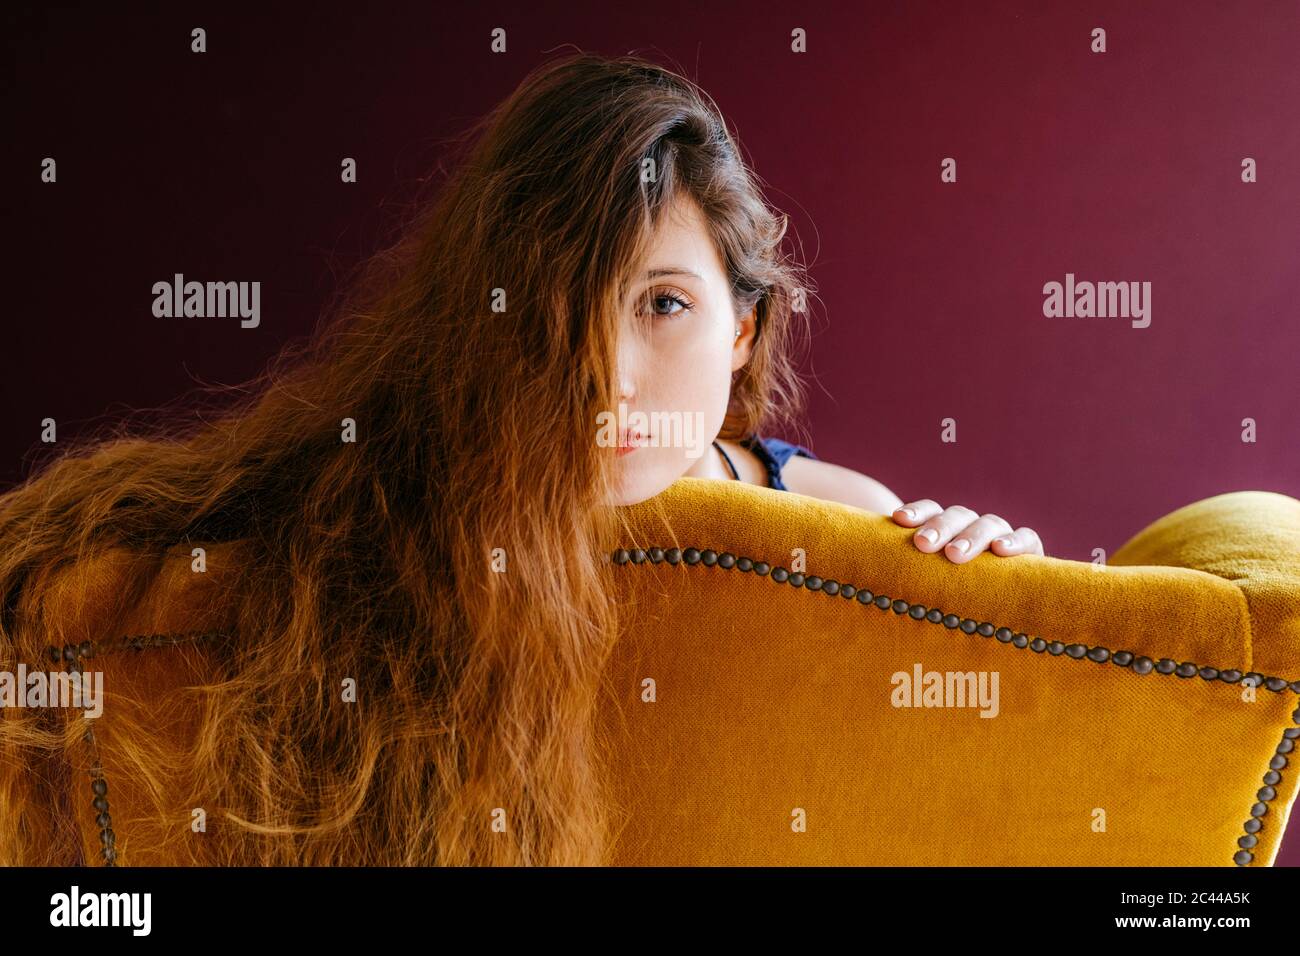 Close-up portrait of young woman with long brown hair leaning on golden chair against colored background Stock Photo